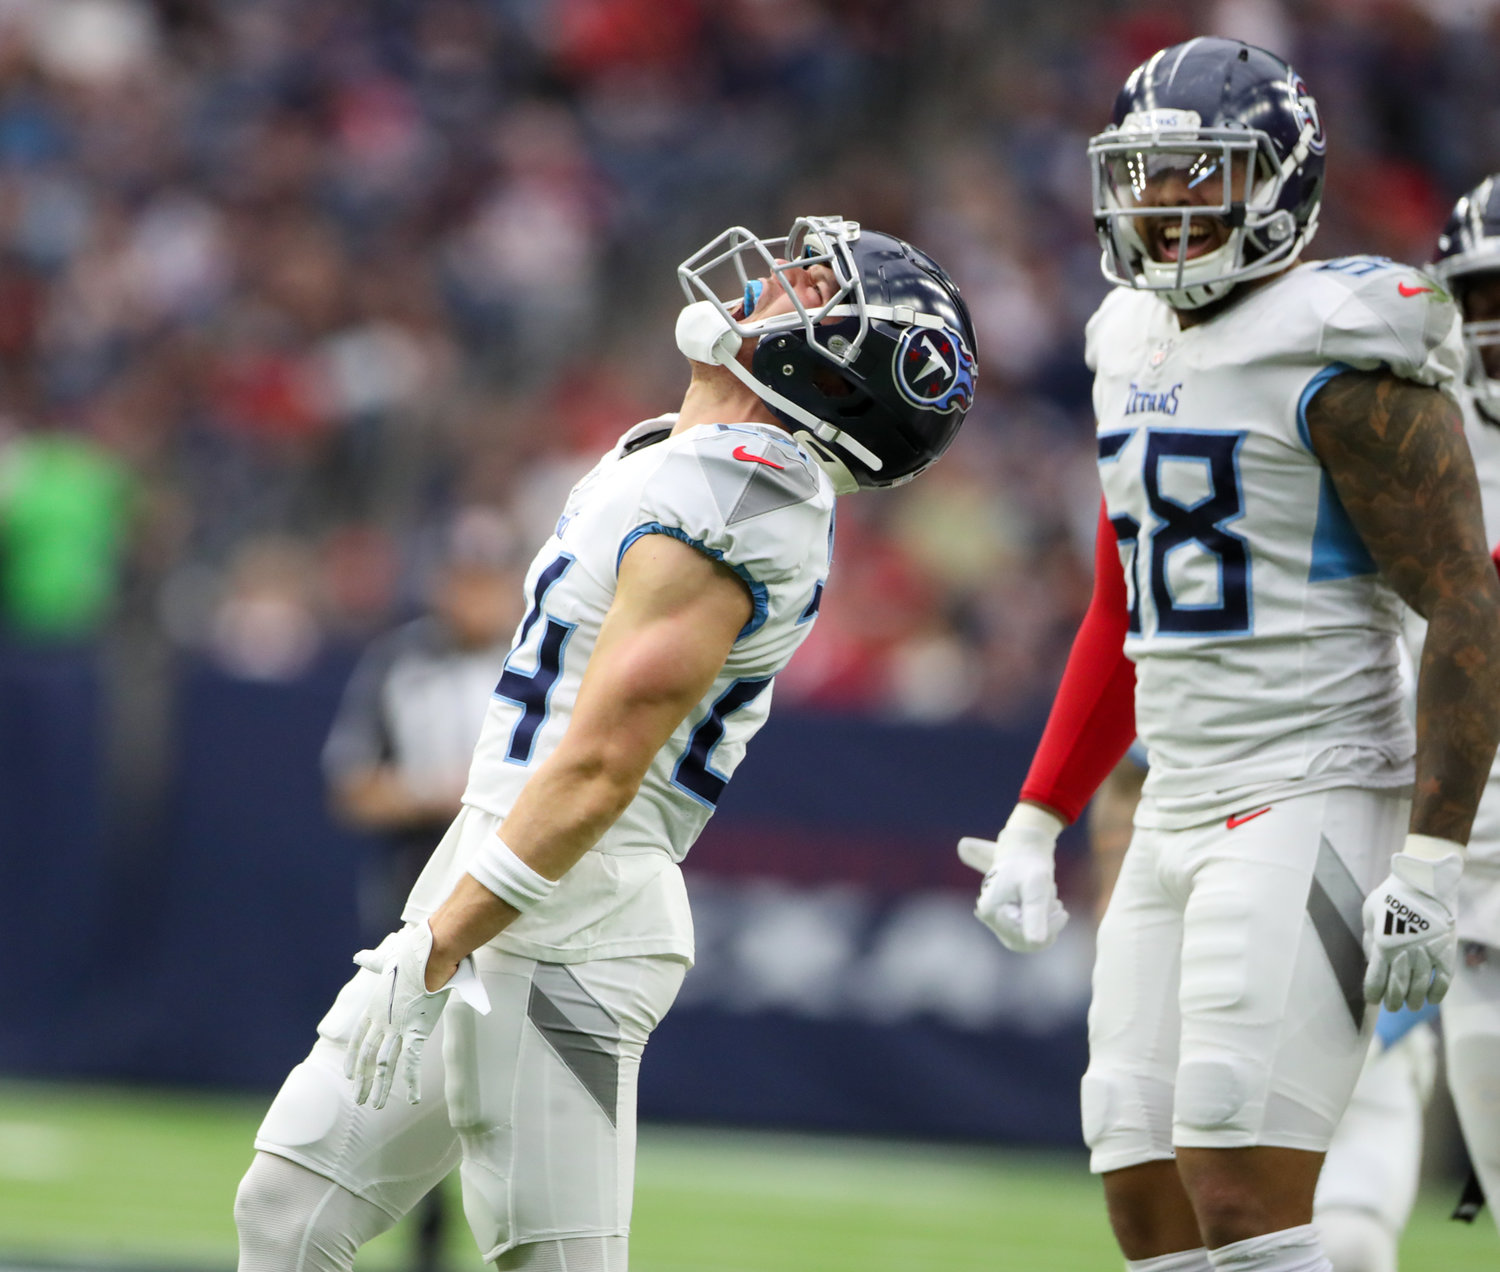 Tennessee Titans cornerback Elijah Molden (24) reacts after making a tackle for a loss during an NFL game between the Texans and the Titans on Jan. 9, 2022 in Houston, Texas.